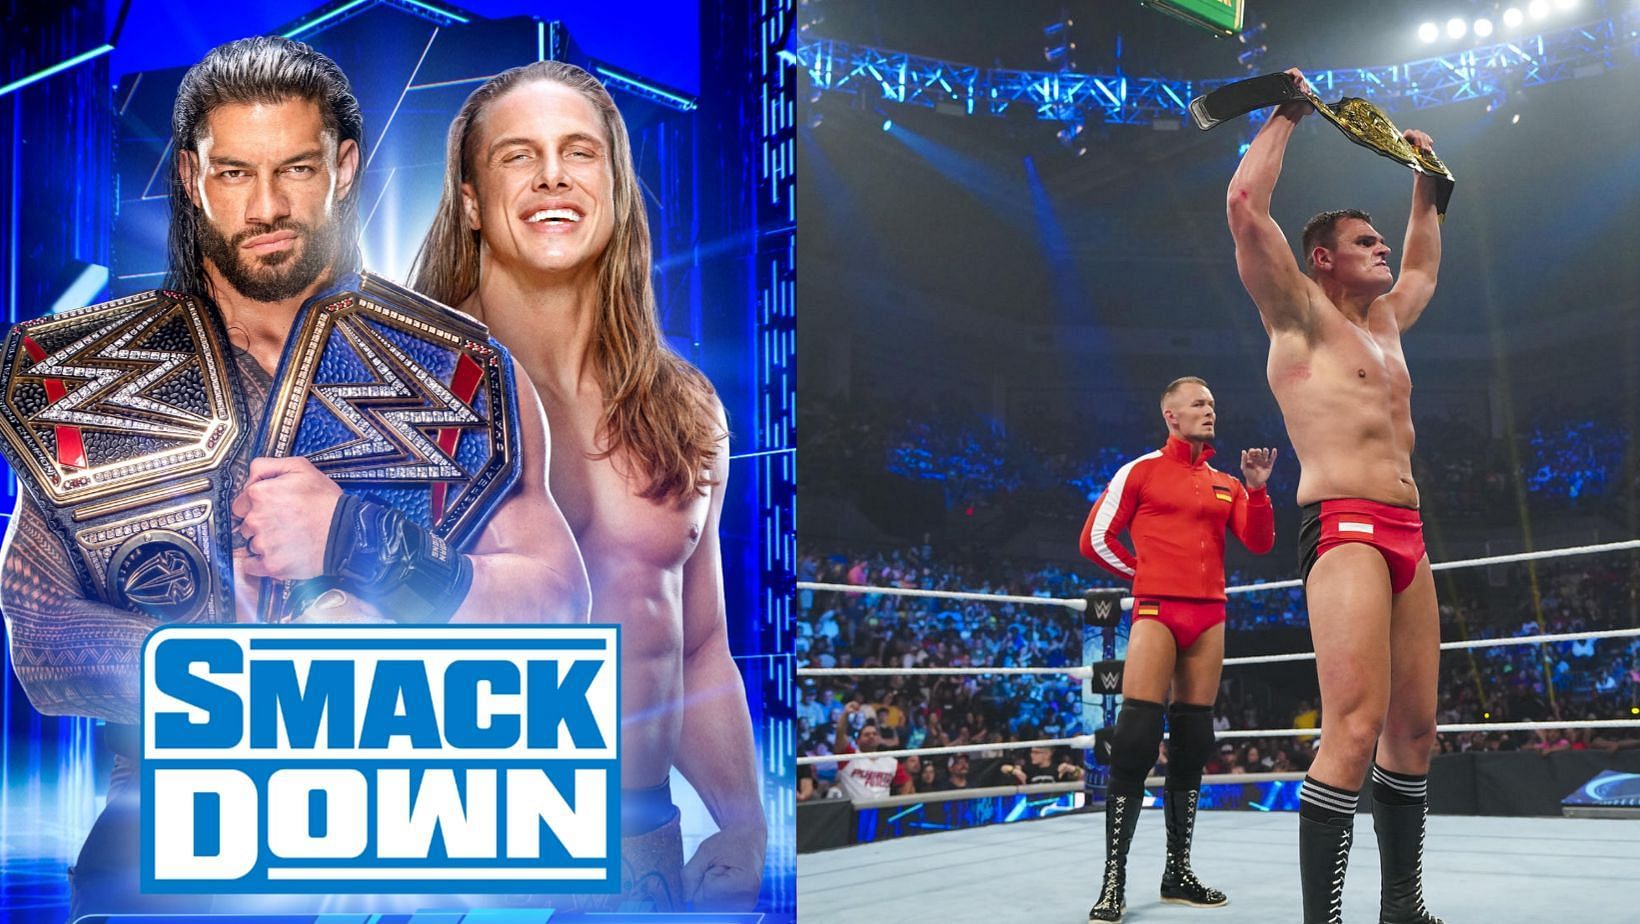 WWE SmackDown took place from Baton Rouge, Louisiana this week